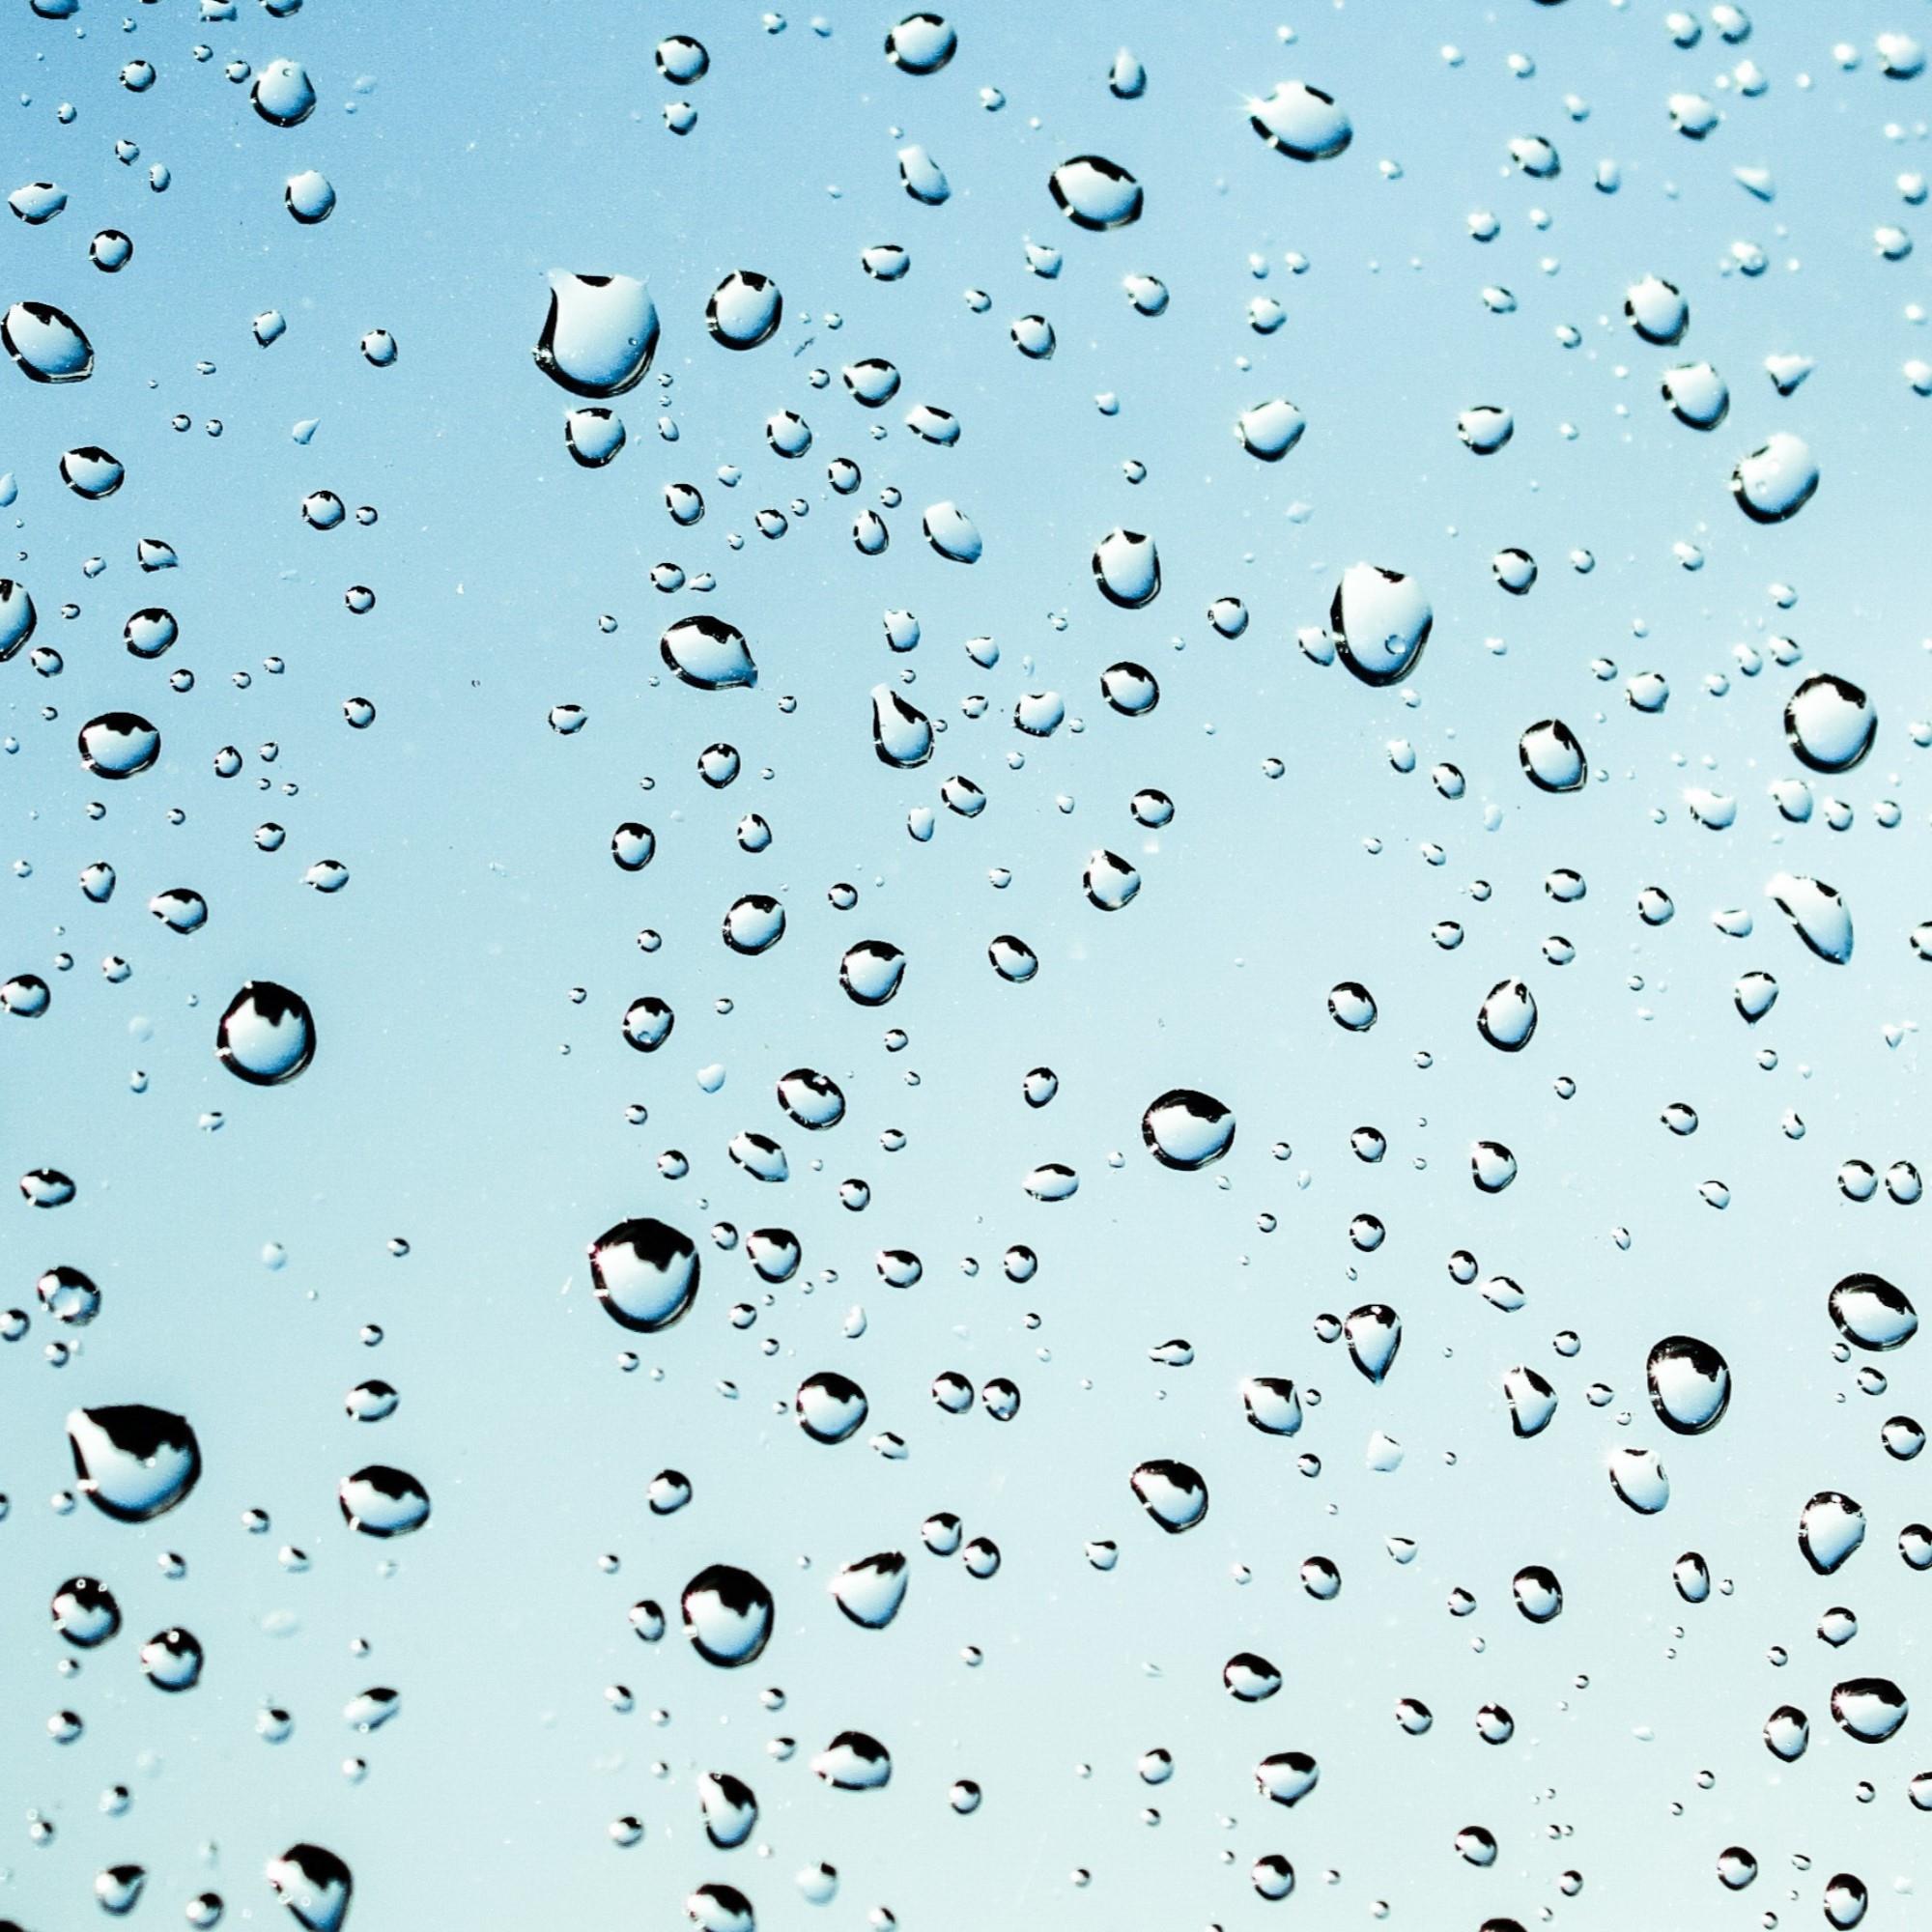 2019 Spring Pitter Patter: Calming Rain for Concentration